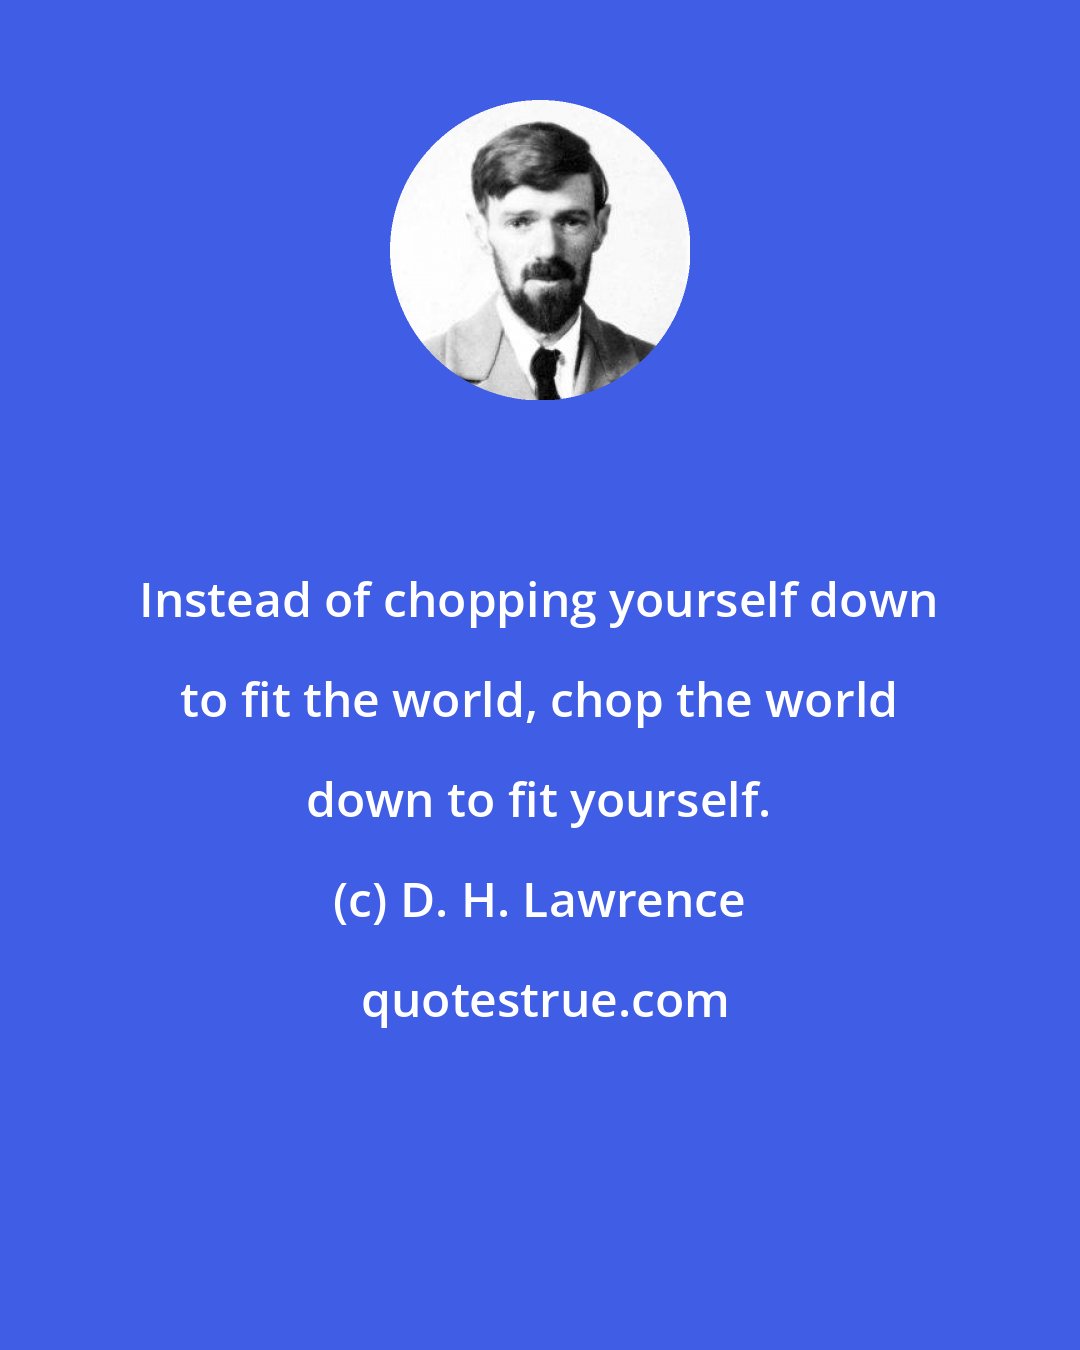 D. H. Lawrence: Instead of chopping yourself down to fit the world, chop the world down to fit yourself.